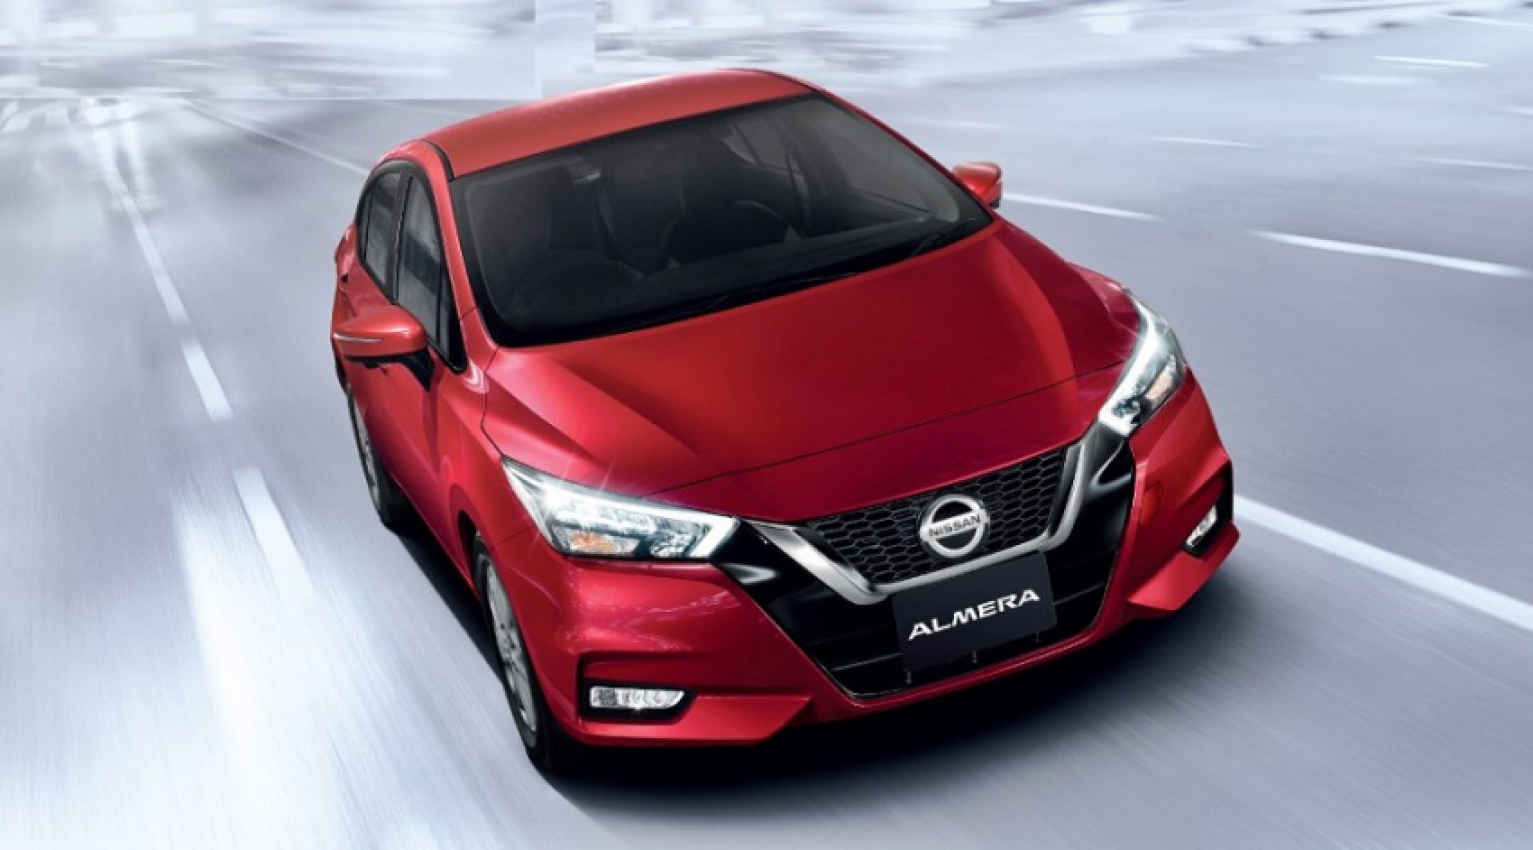 autos, cars, nissan, booststars, edaran tan chong motor, nissan almera turbo, nissan malaysia, nissan navara, nissan x-trail, sales promotion, a chance to become a ‘millionaire’ when purchasing a new nissan vehicle in march